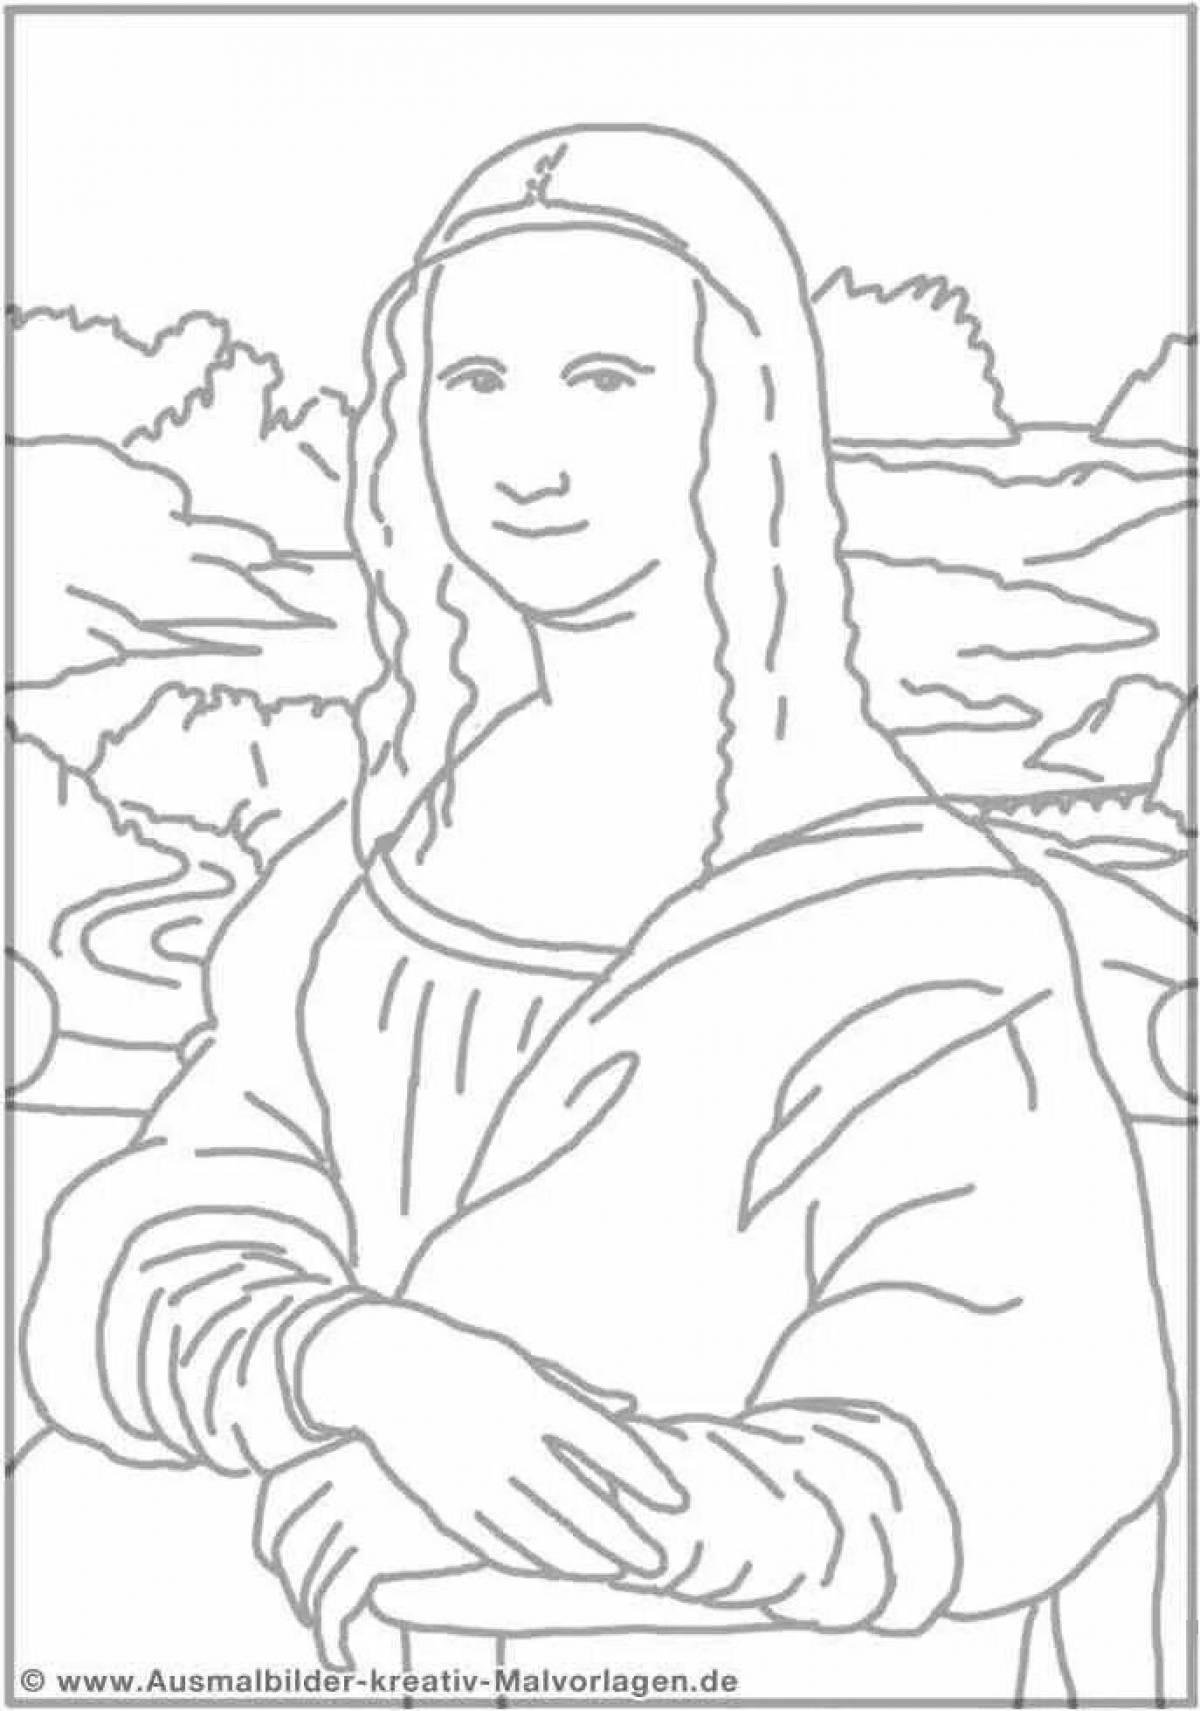 Mona lisa's gorgeous coloring page